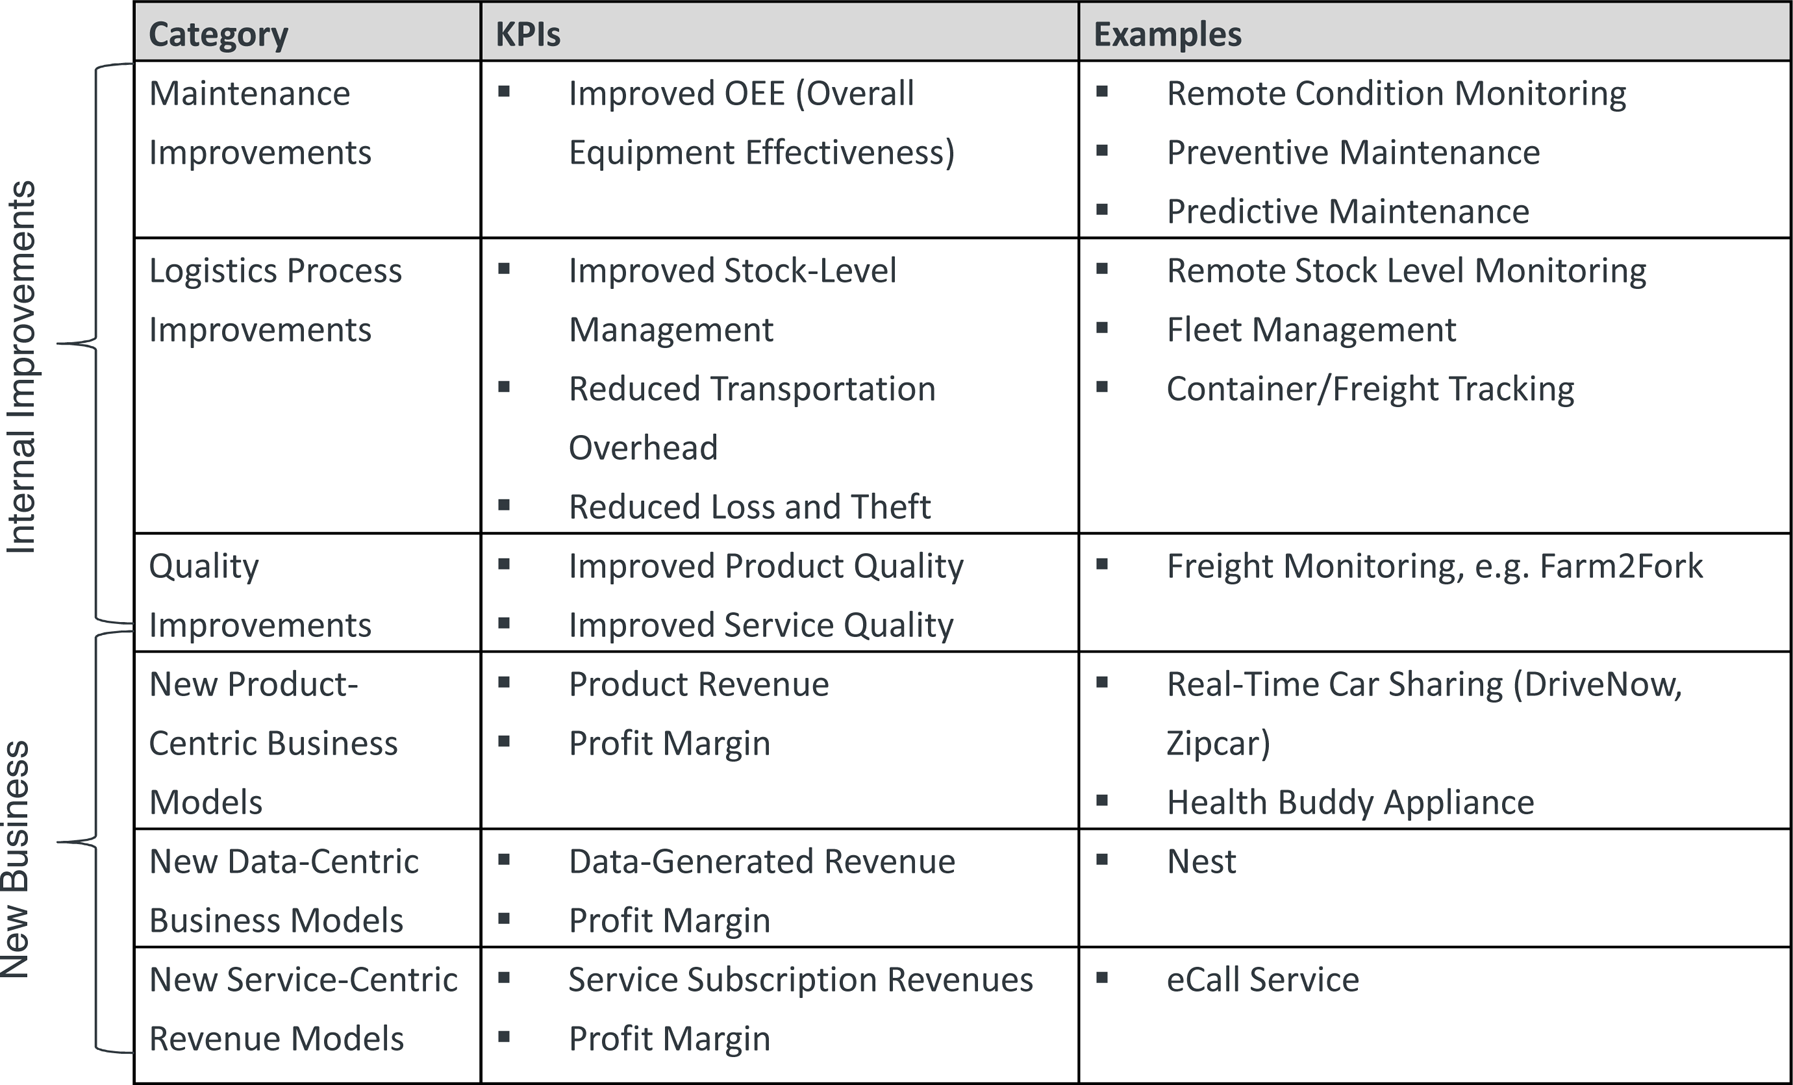 IoT Business Opportunity Categories